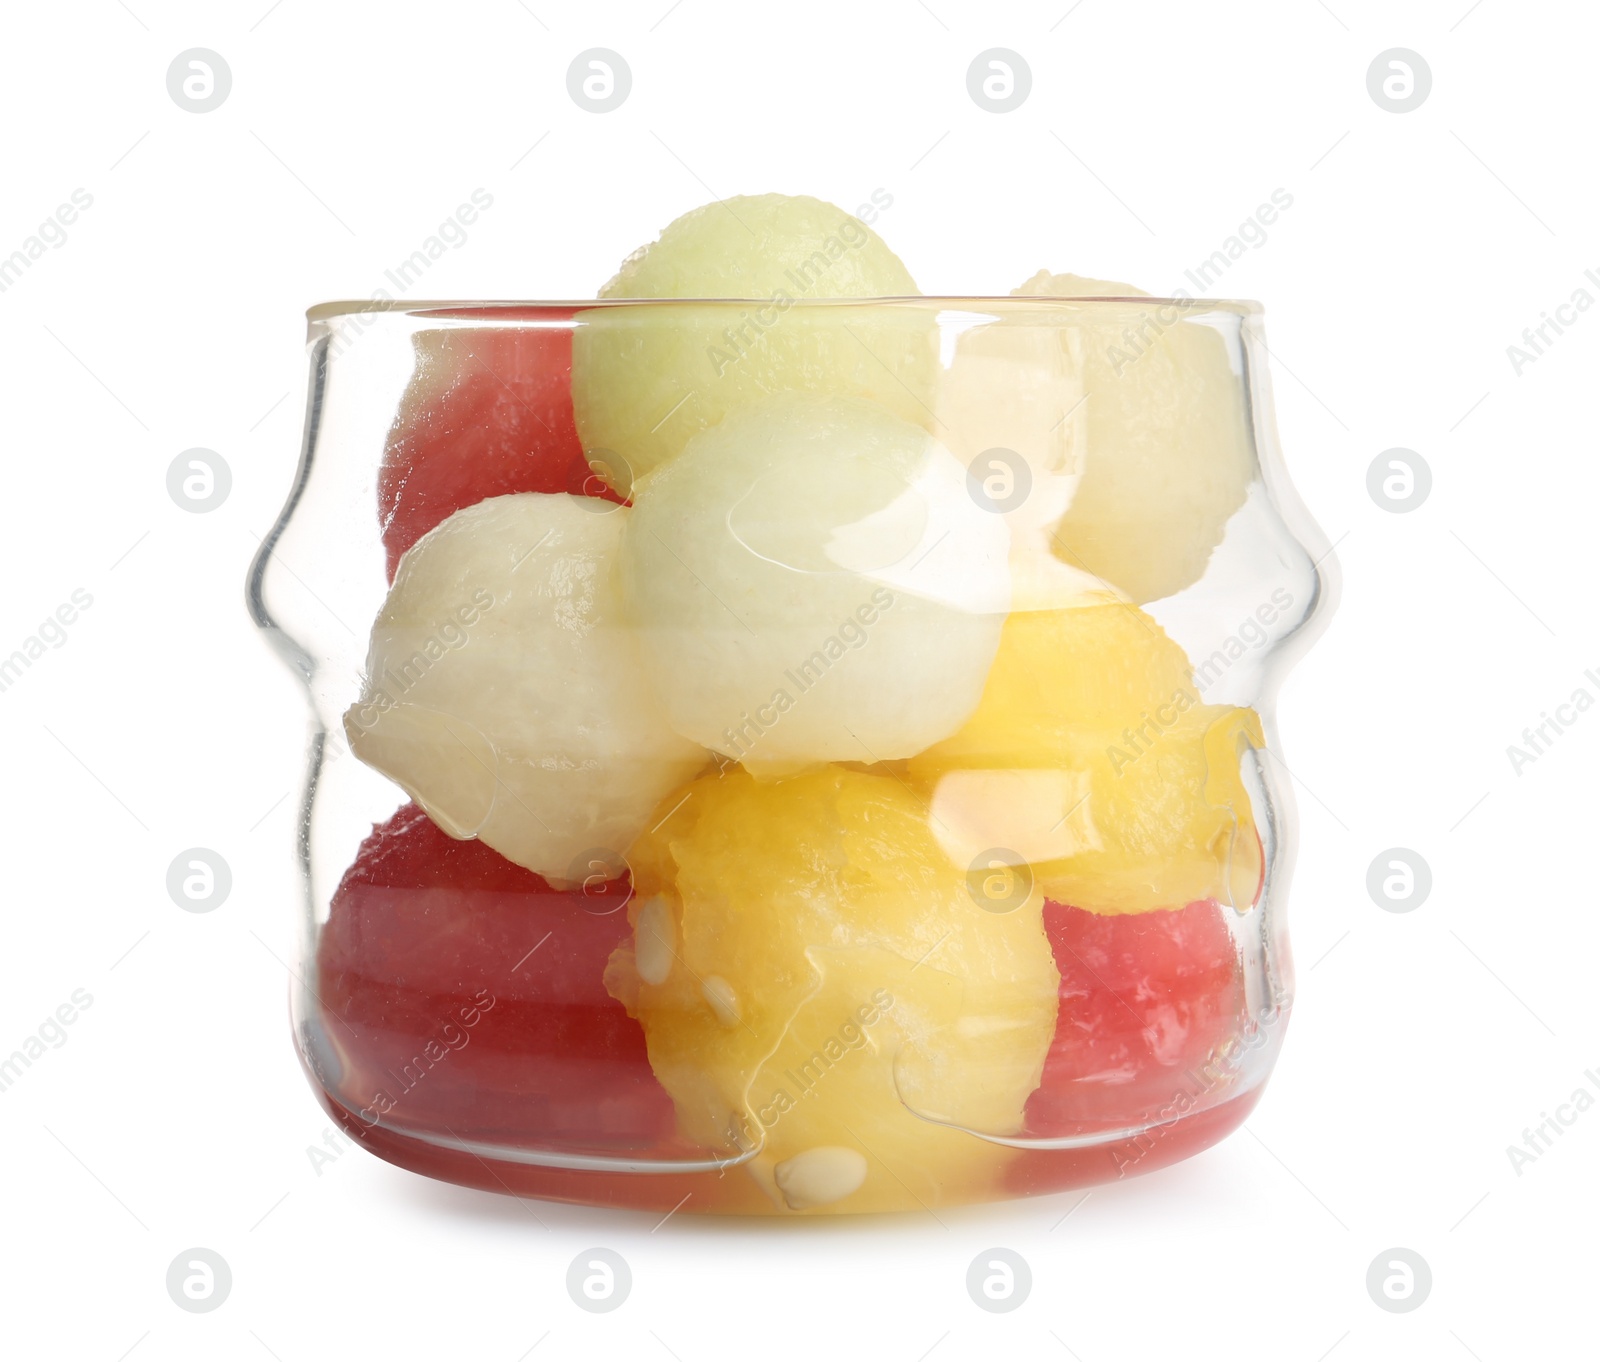 Photo of Glass dish of melon and watermelon balls on white background